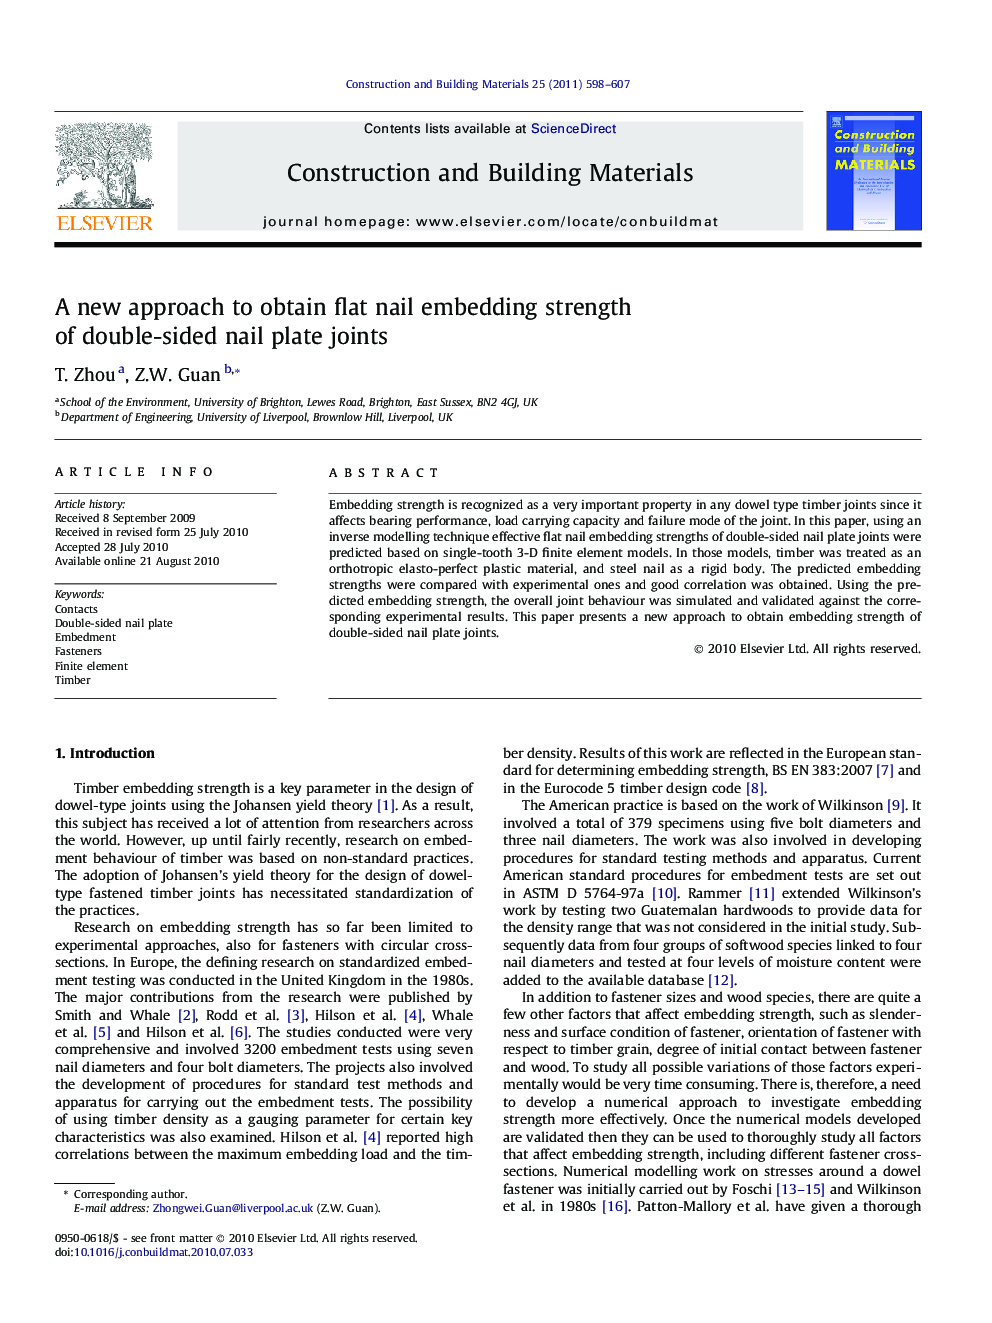 A new approach to obtain flat nail embedding strength of double-sided nail plate joints